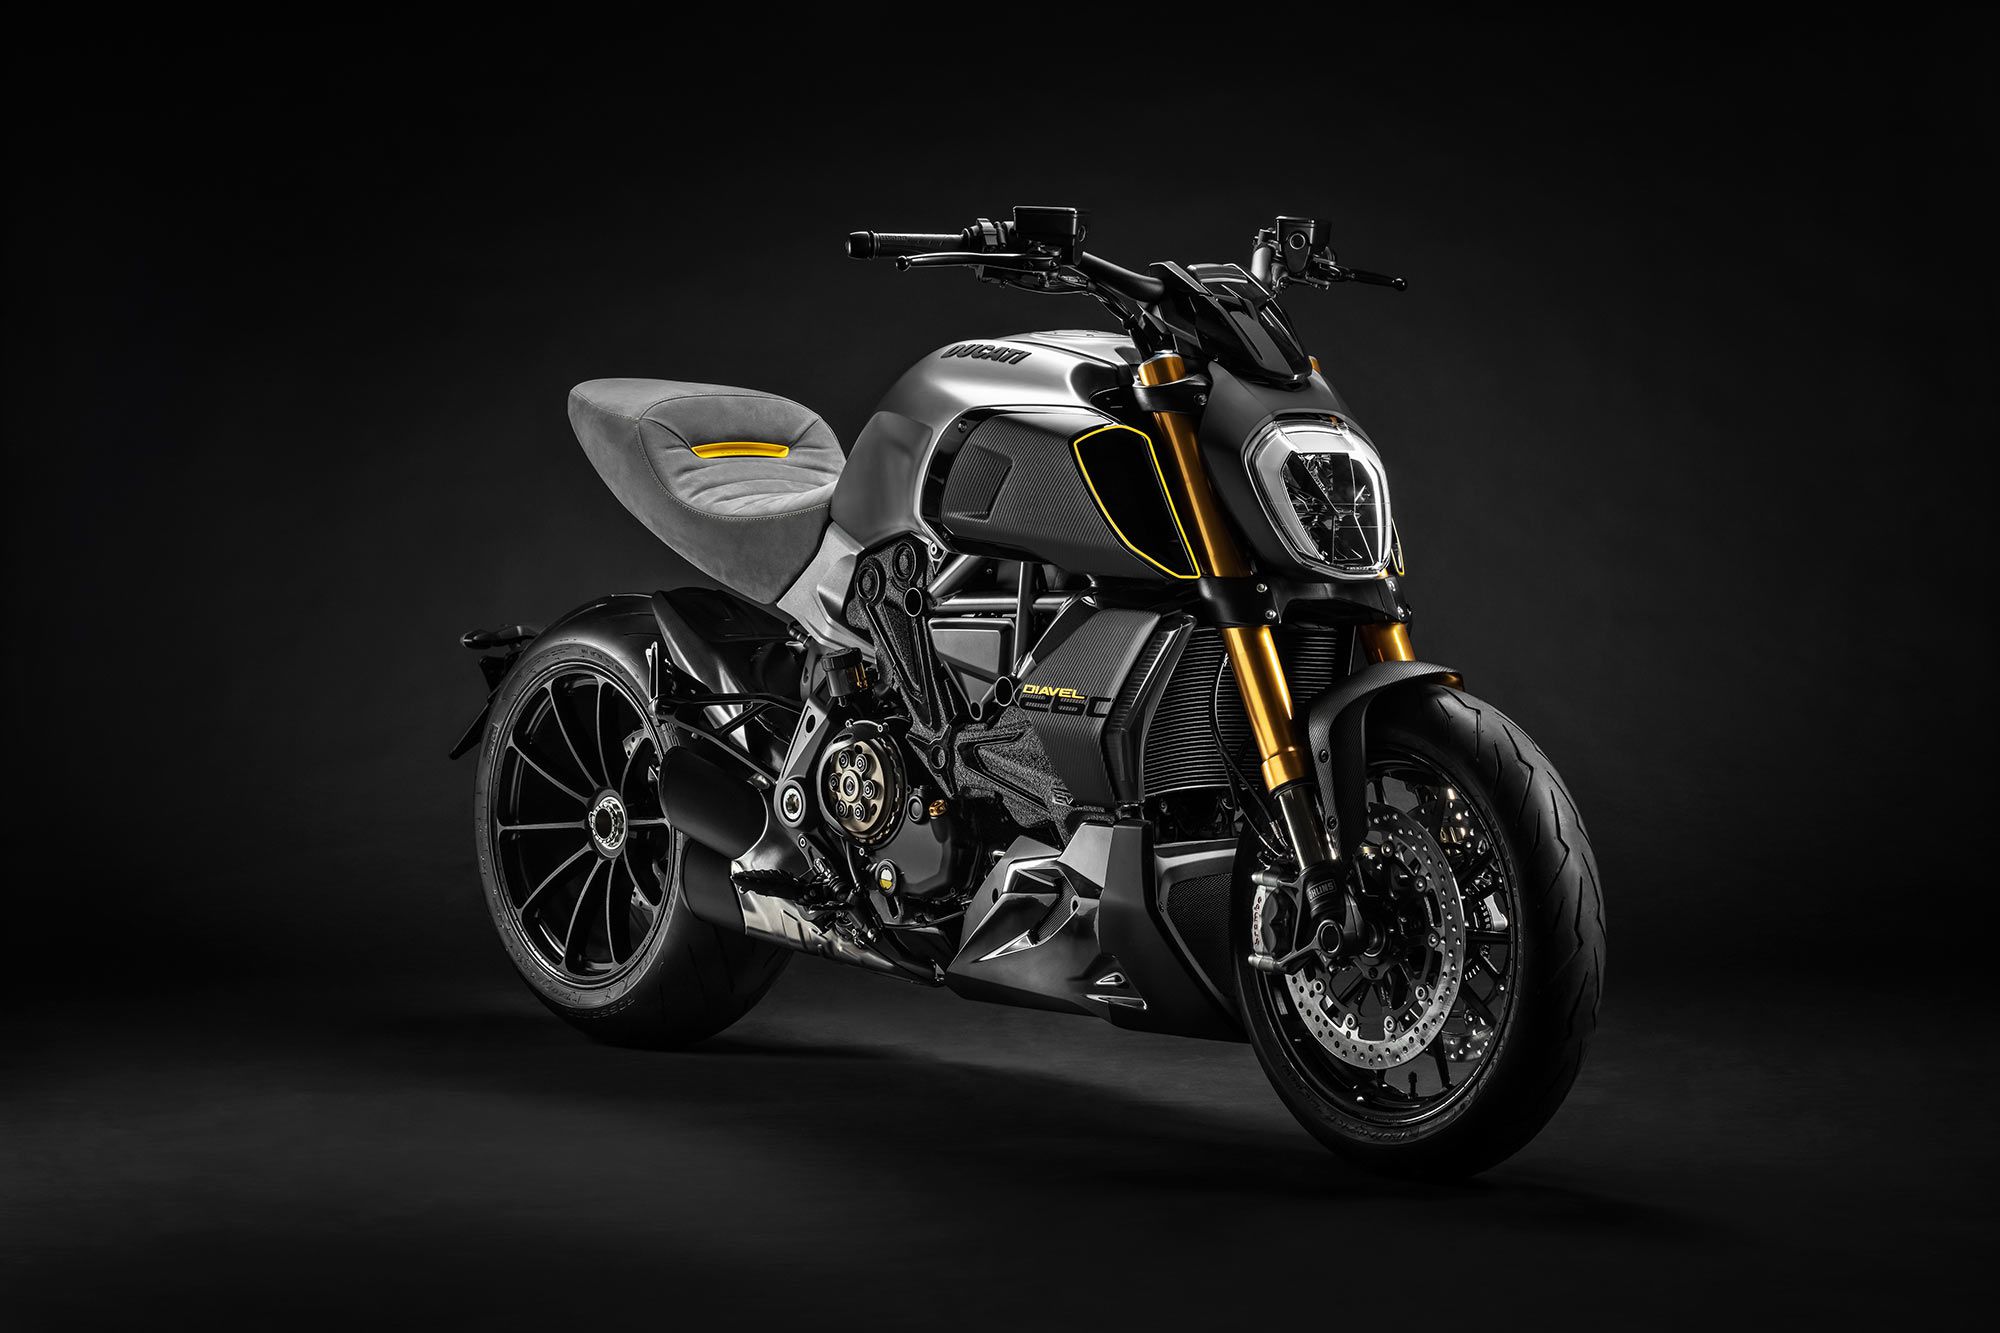 This is the Diavel “Materico” concept on which the new Black and Steel bike was based.